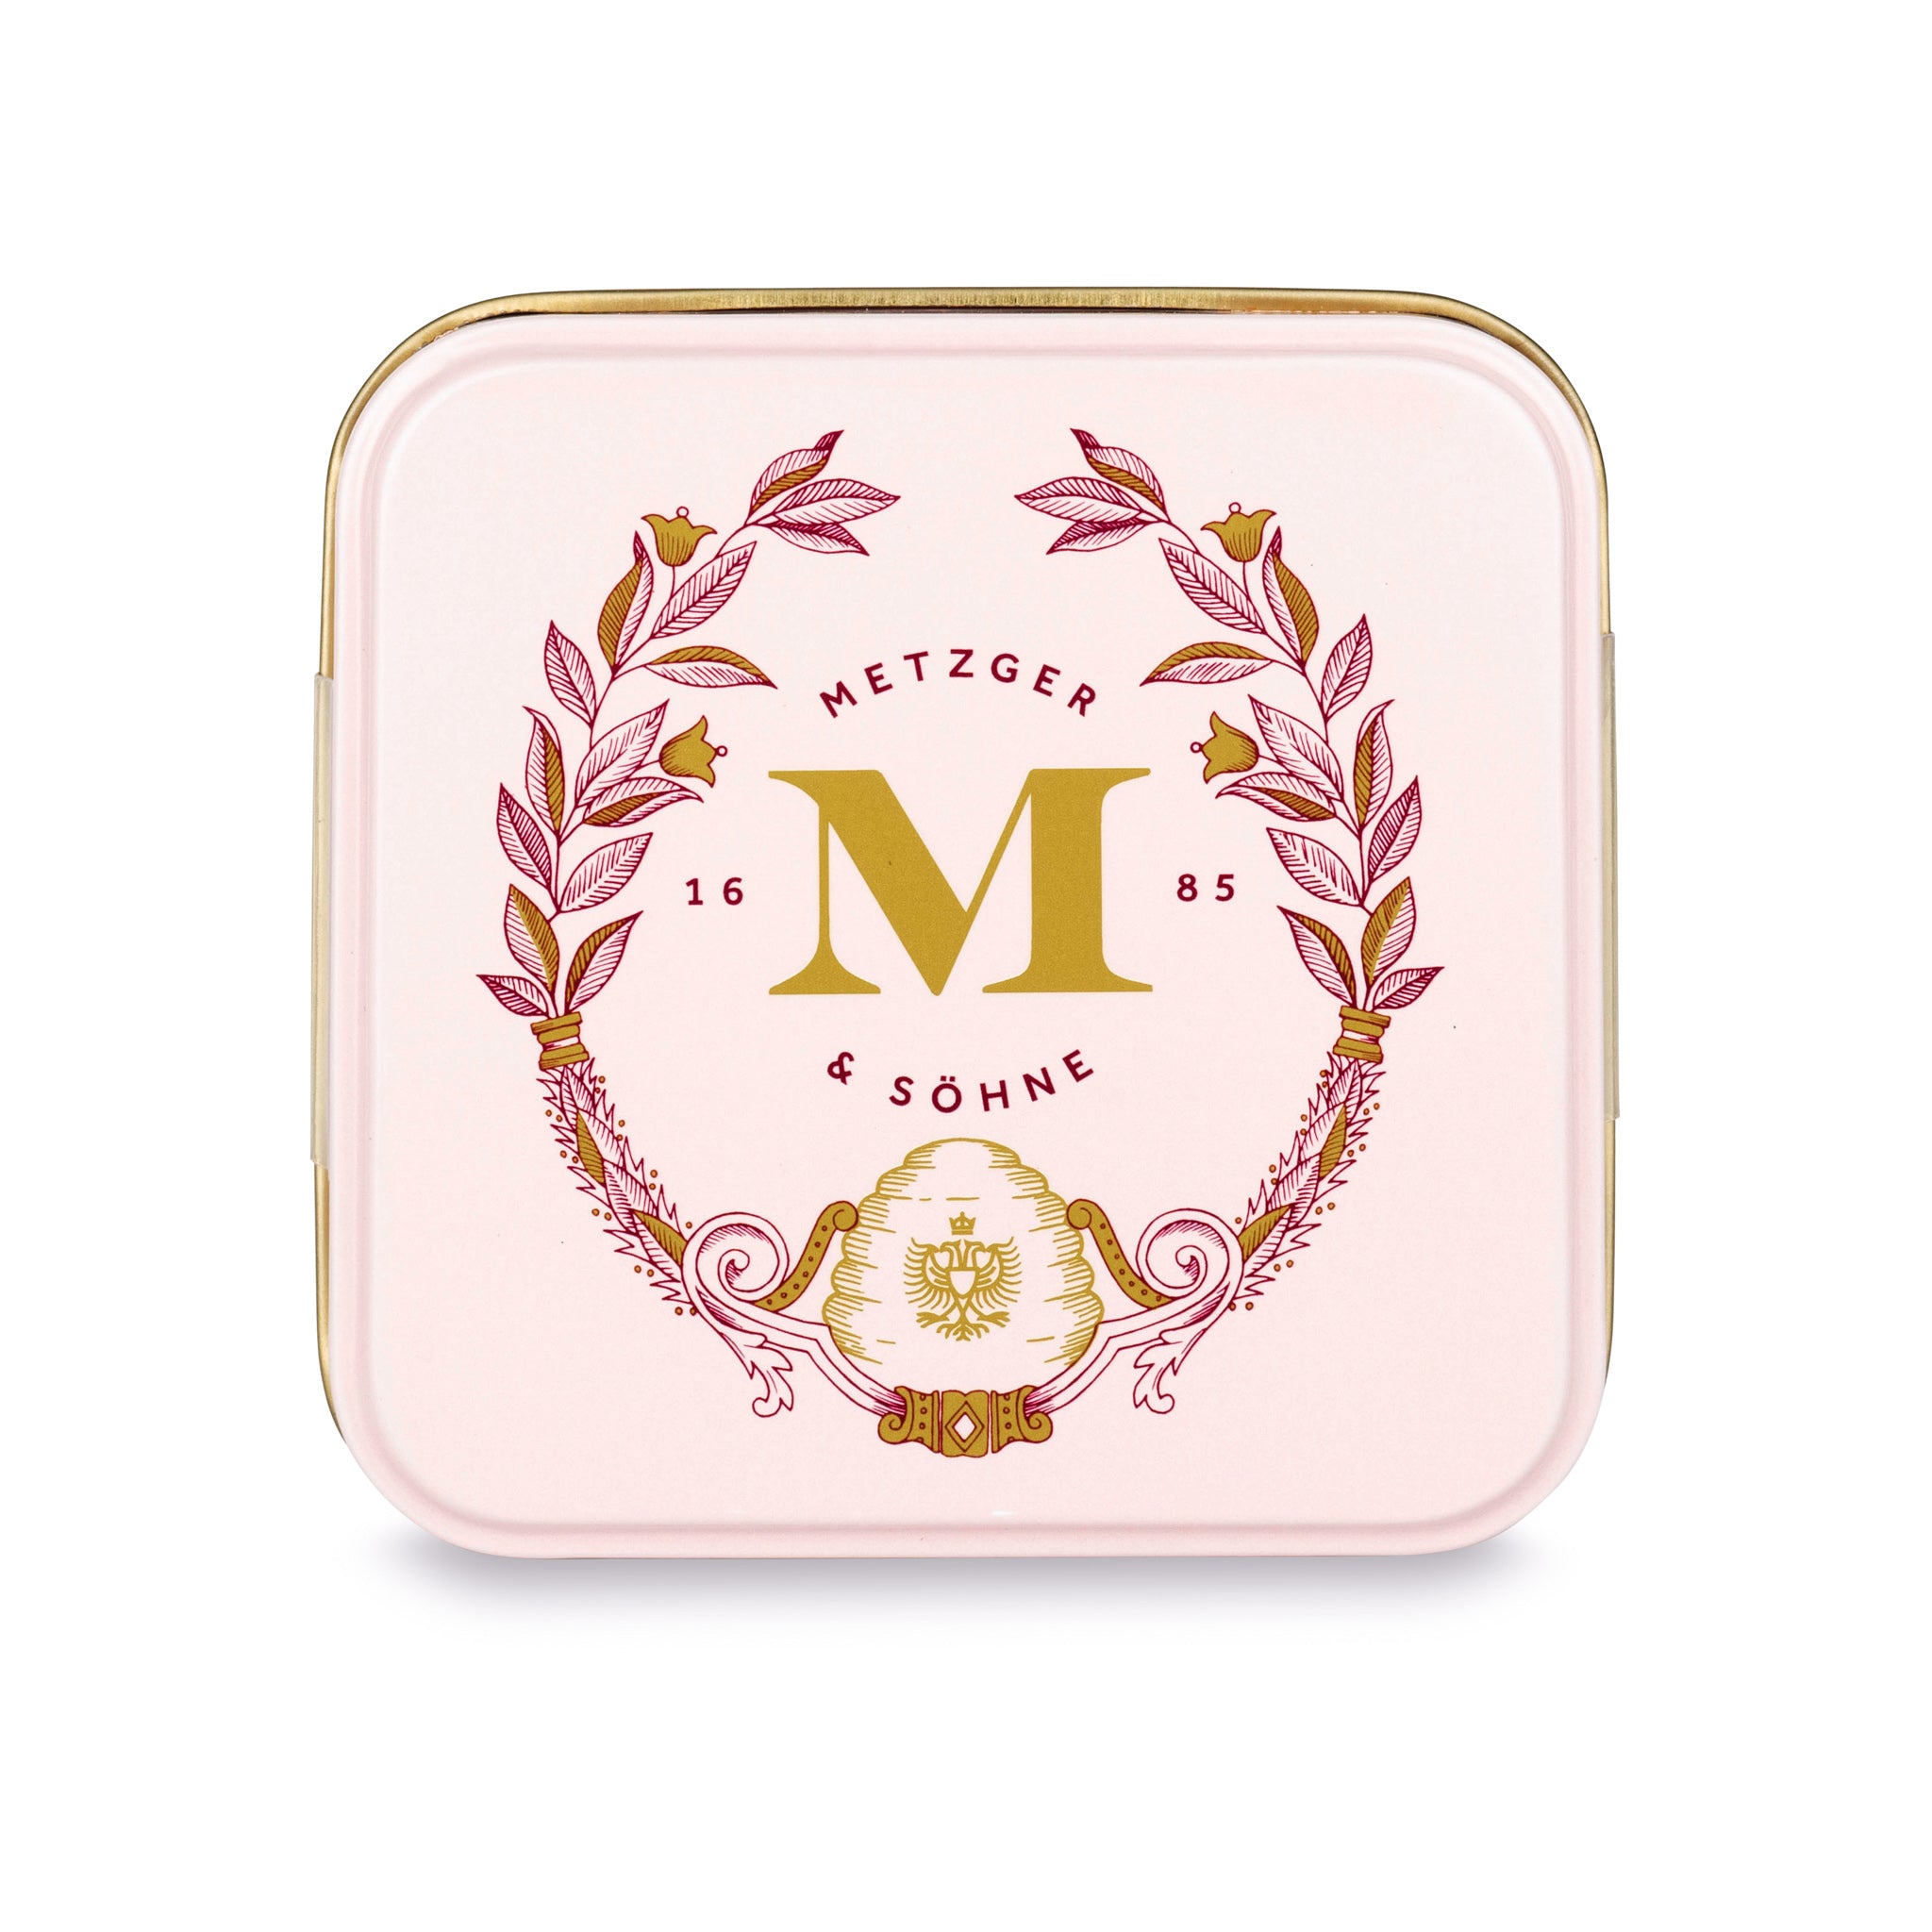 Petit Metzger signature tin in pastel pink filled with 4 different Lebkuchen 'honey cake' pralines.